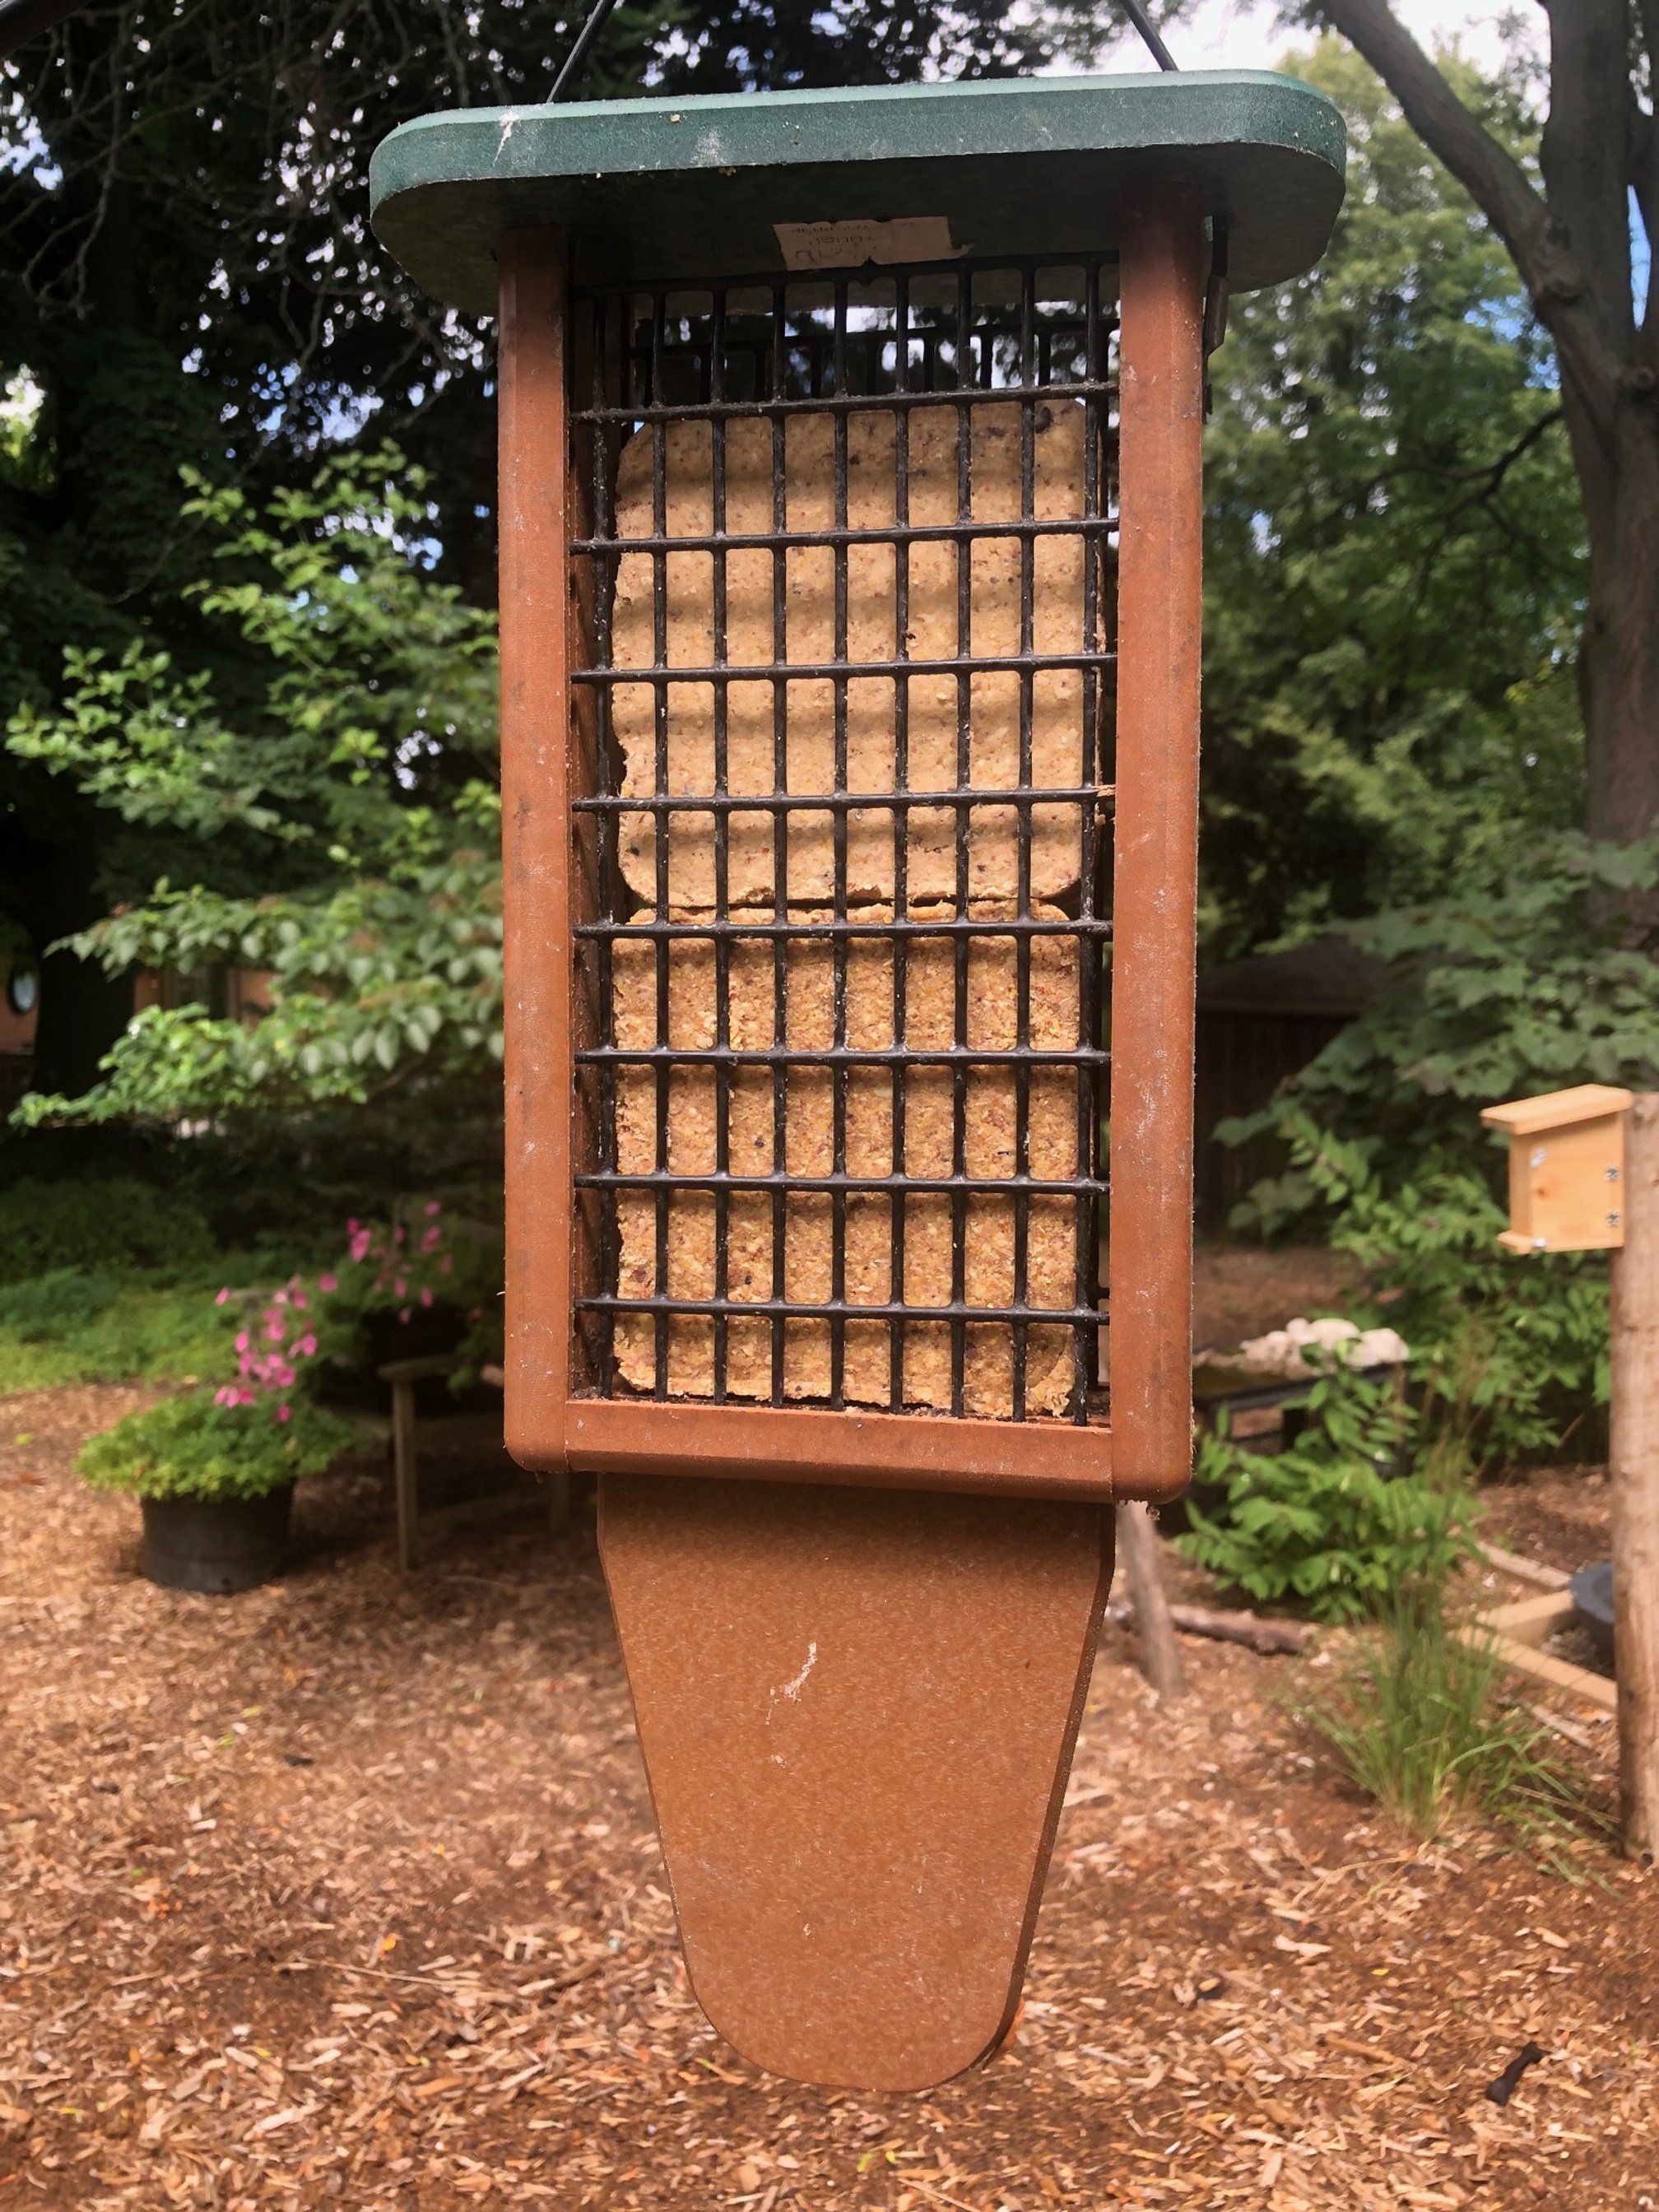 Image of a suet feeder with a tail prop for larger woodpeckers.